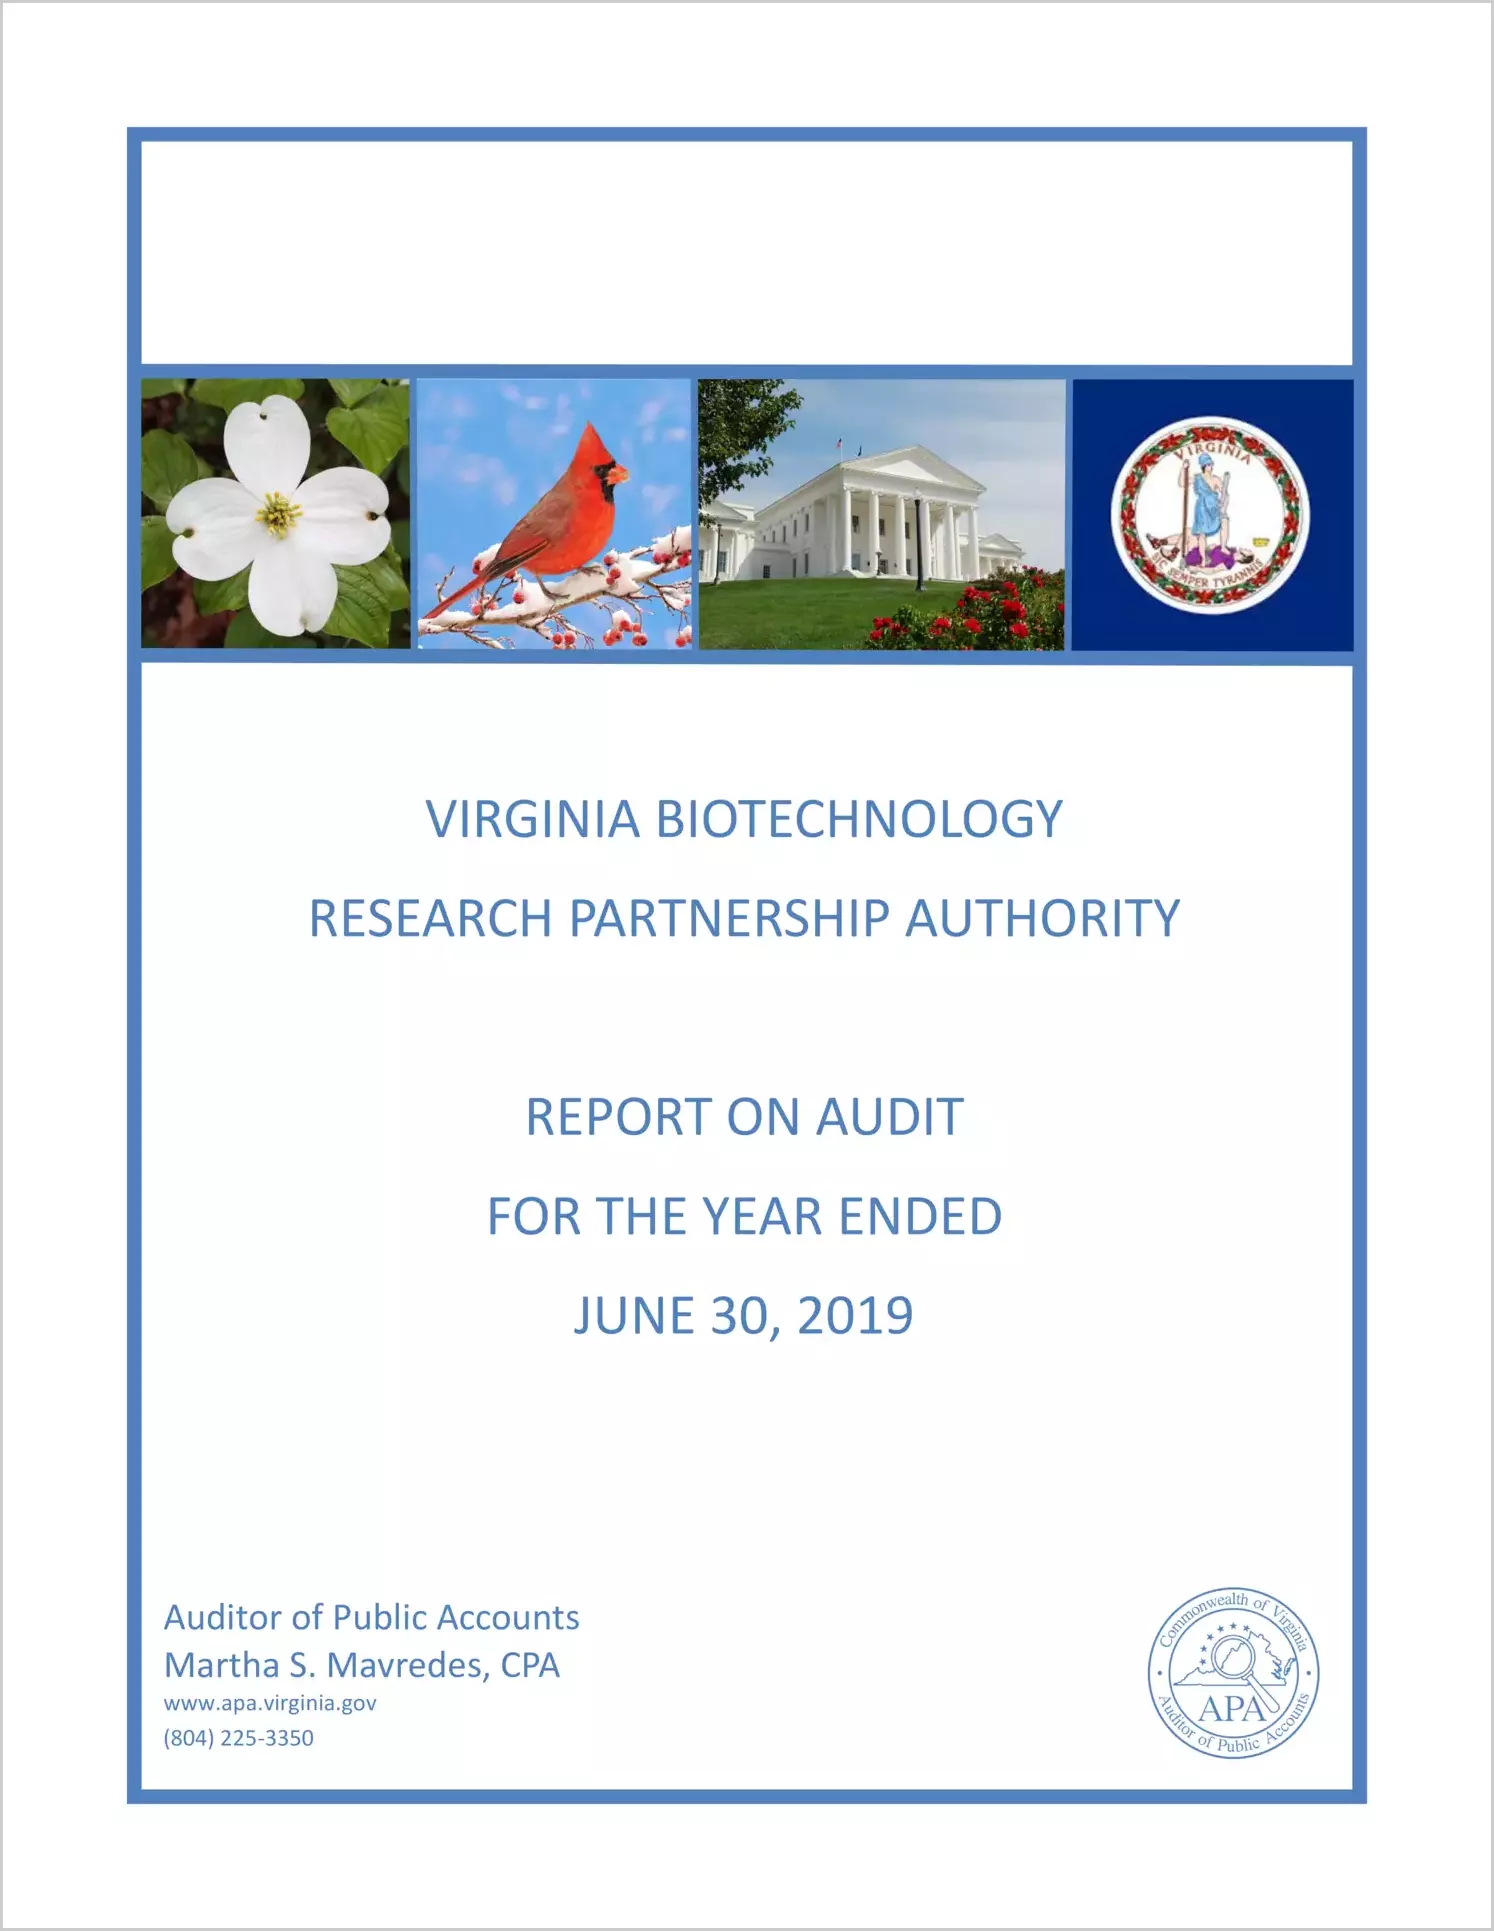 Virginia BiotechnologyResearch Partnership Authority for the year ended June 30, 2019